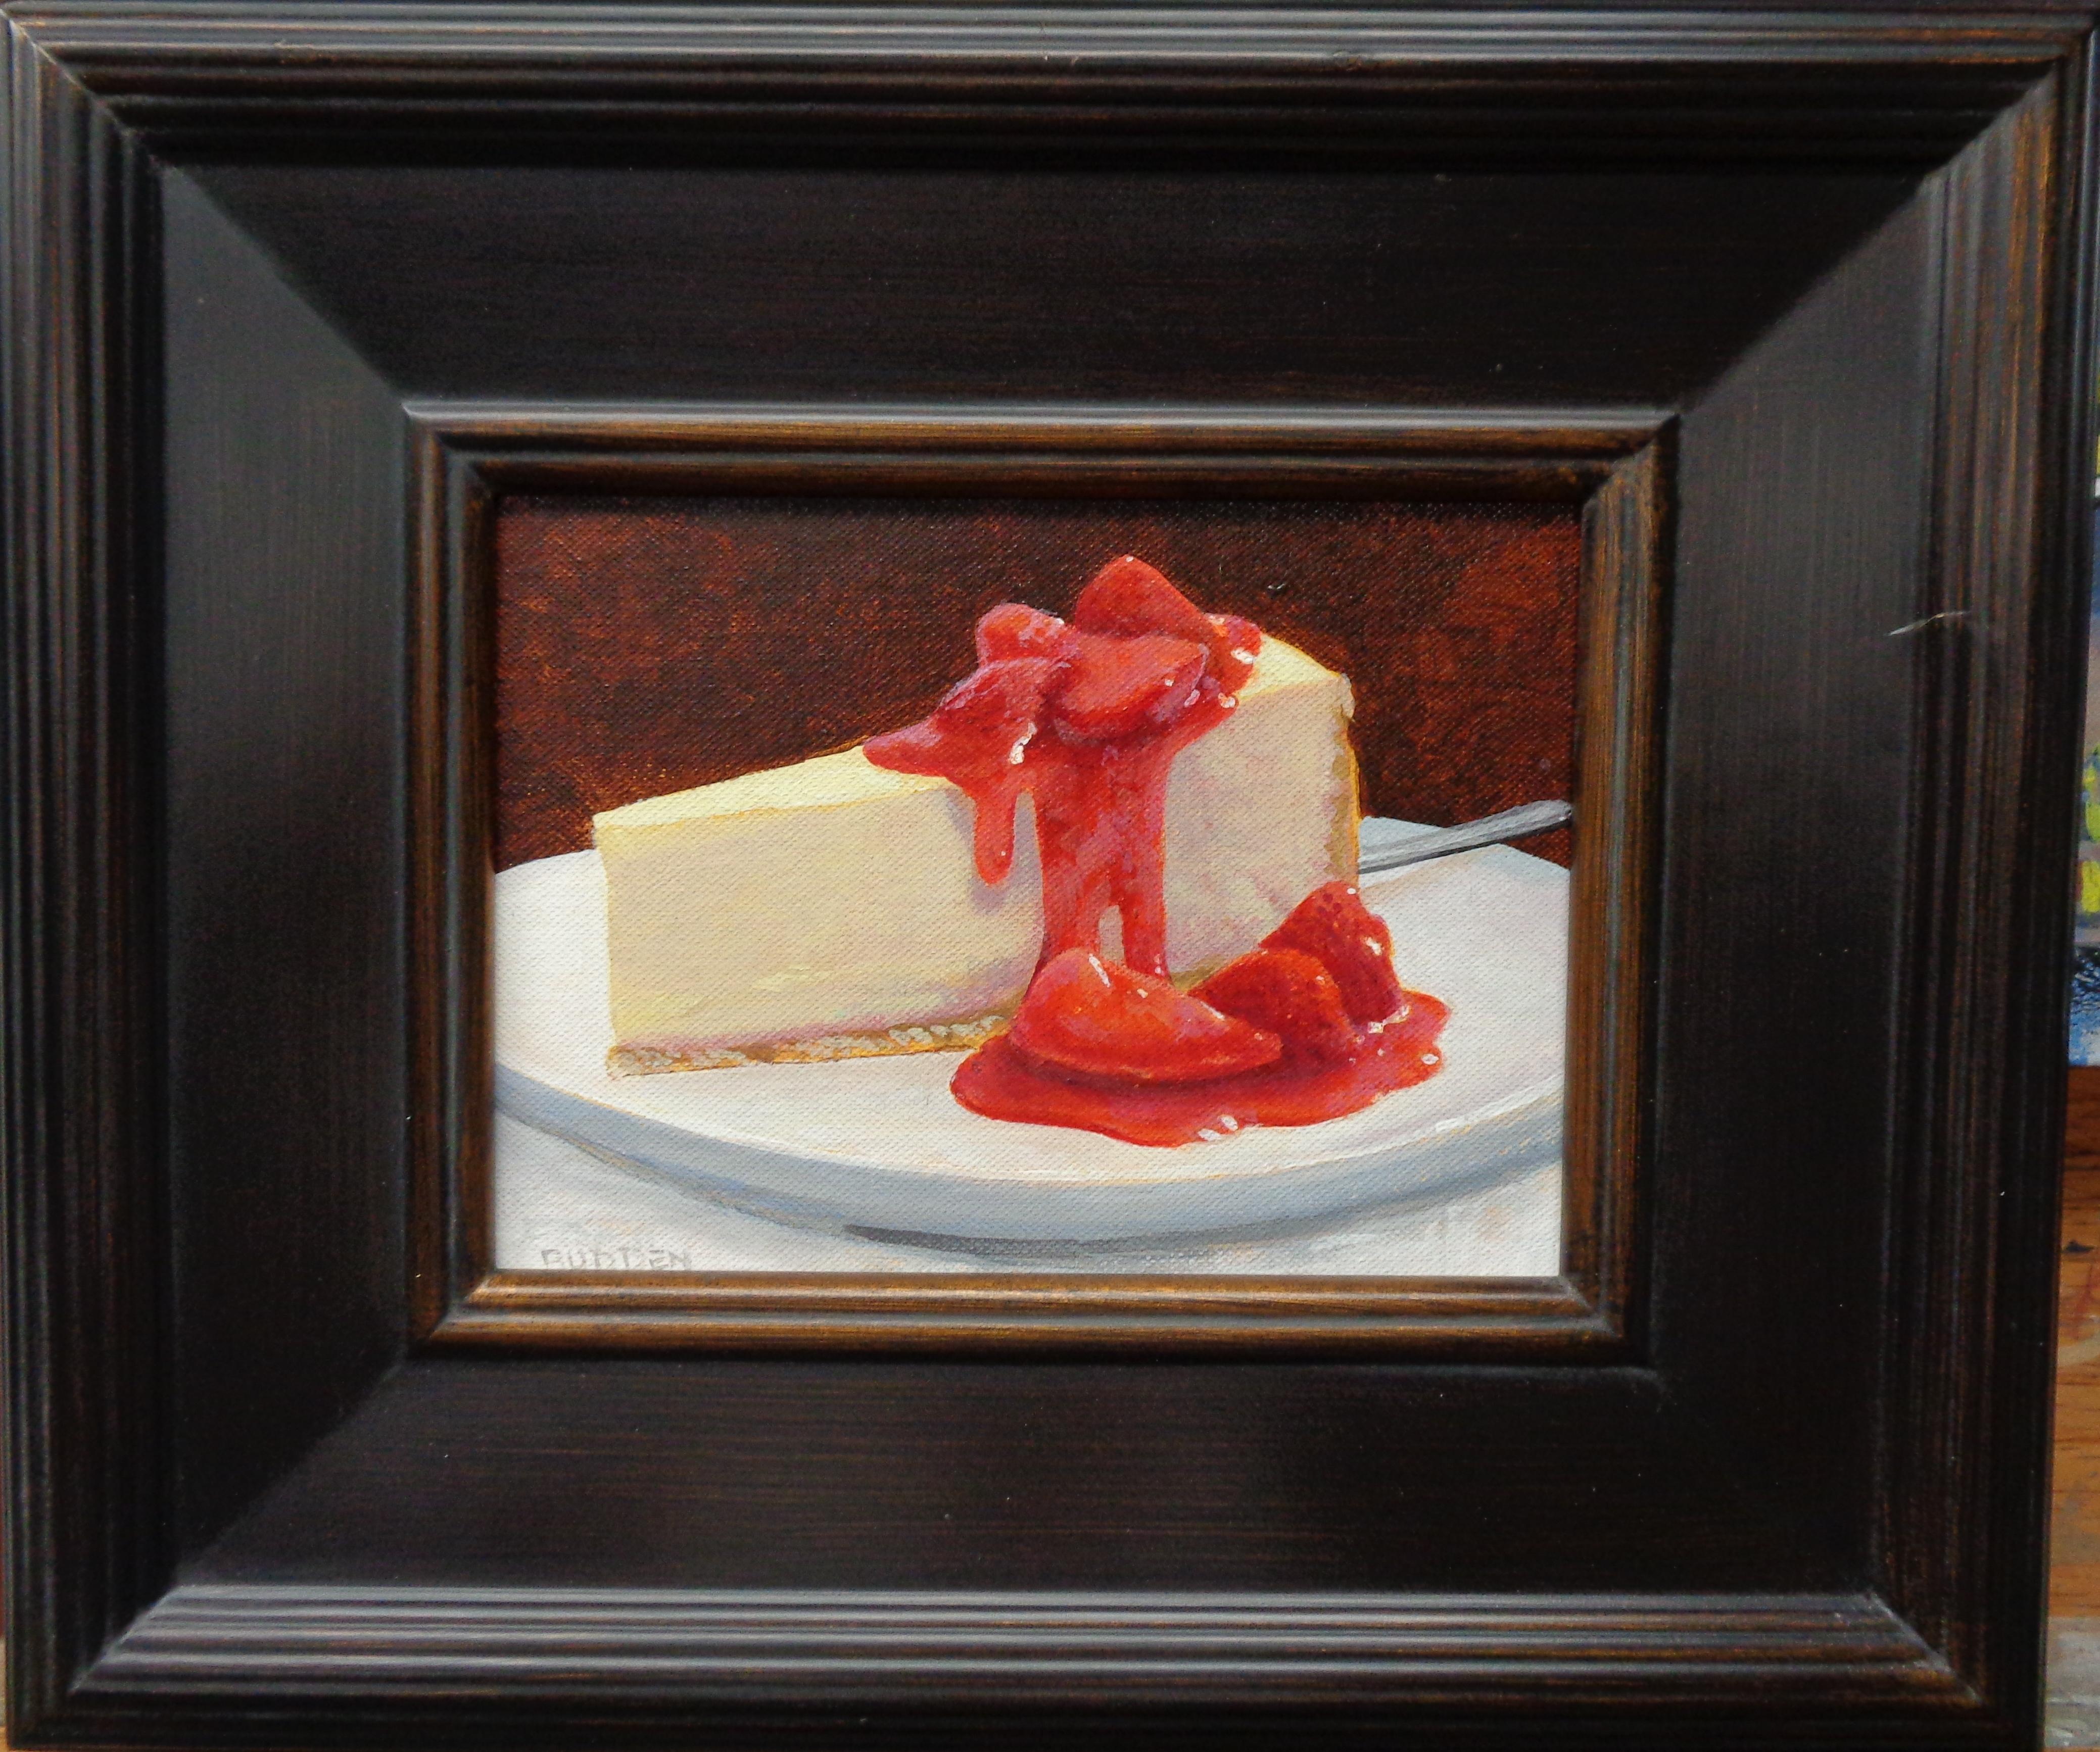 Contemporary Dessert Painting by Michael Budden, Strawberrry Cheesecake